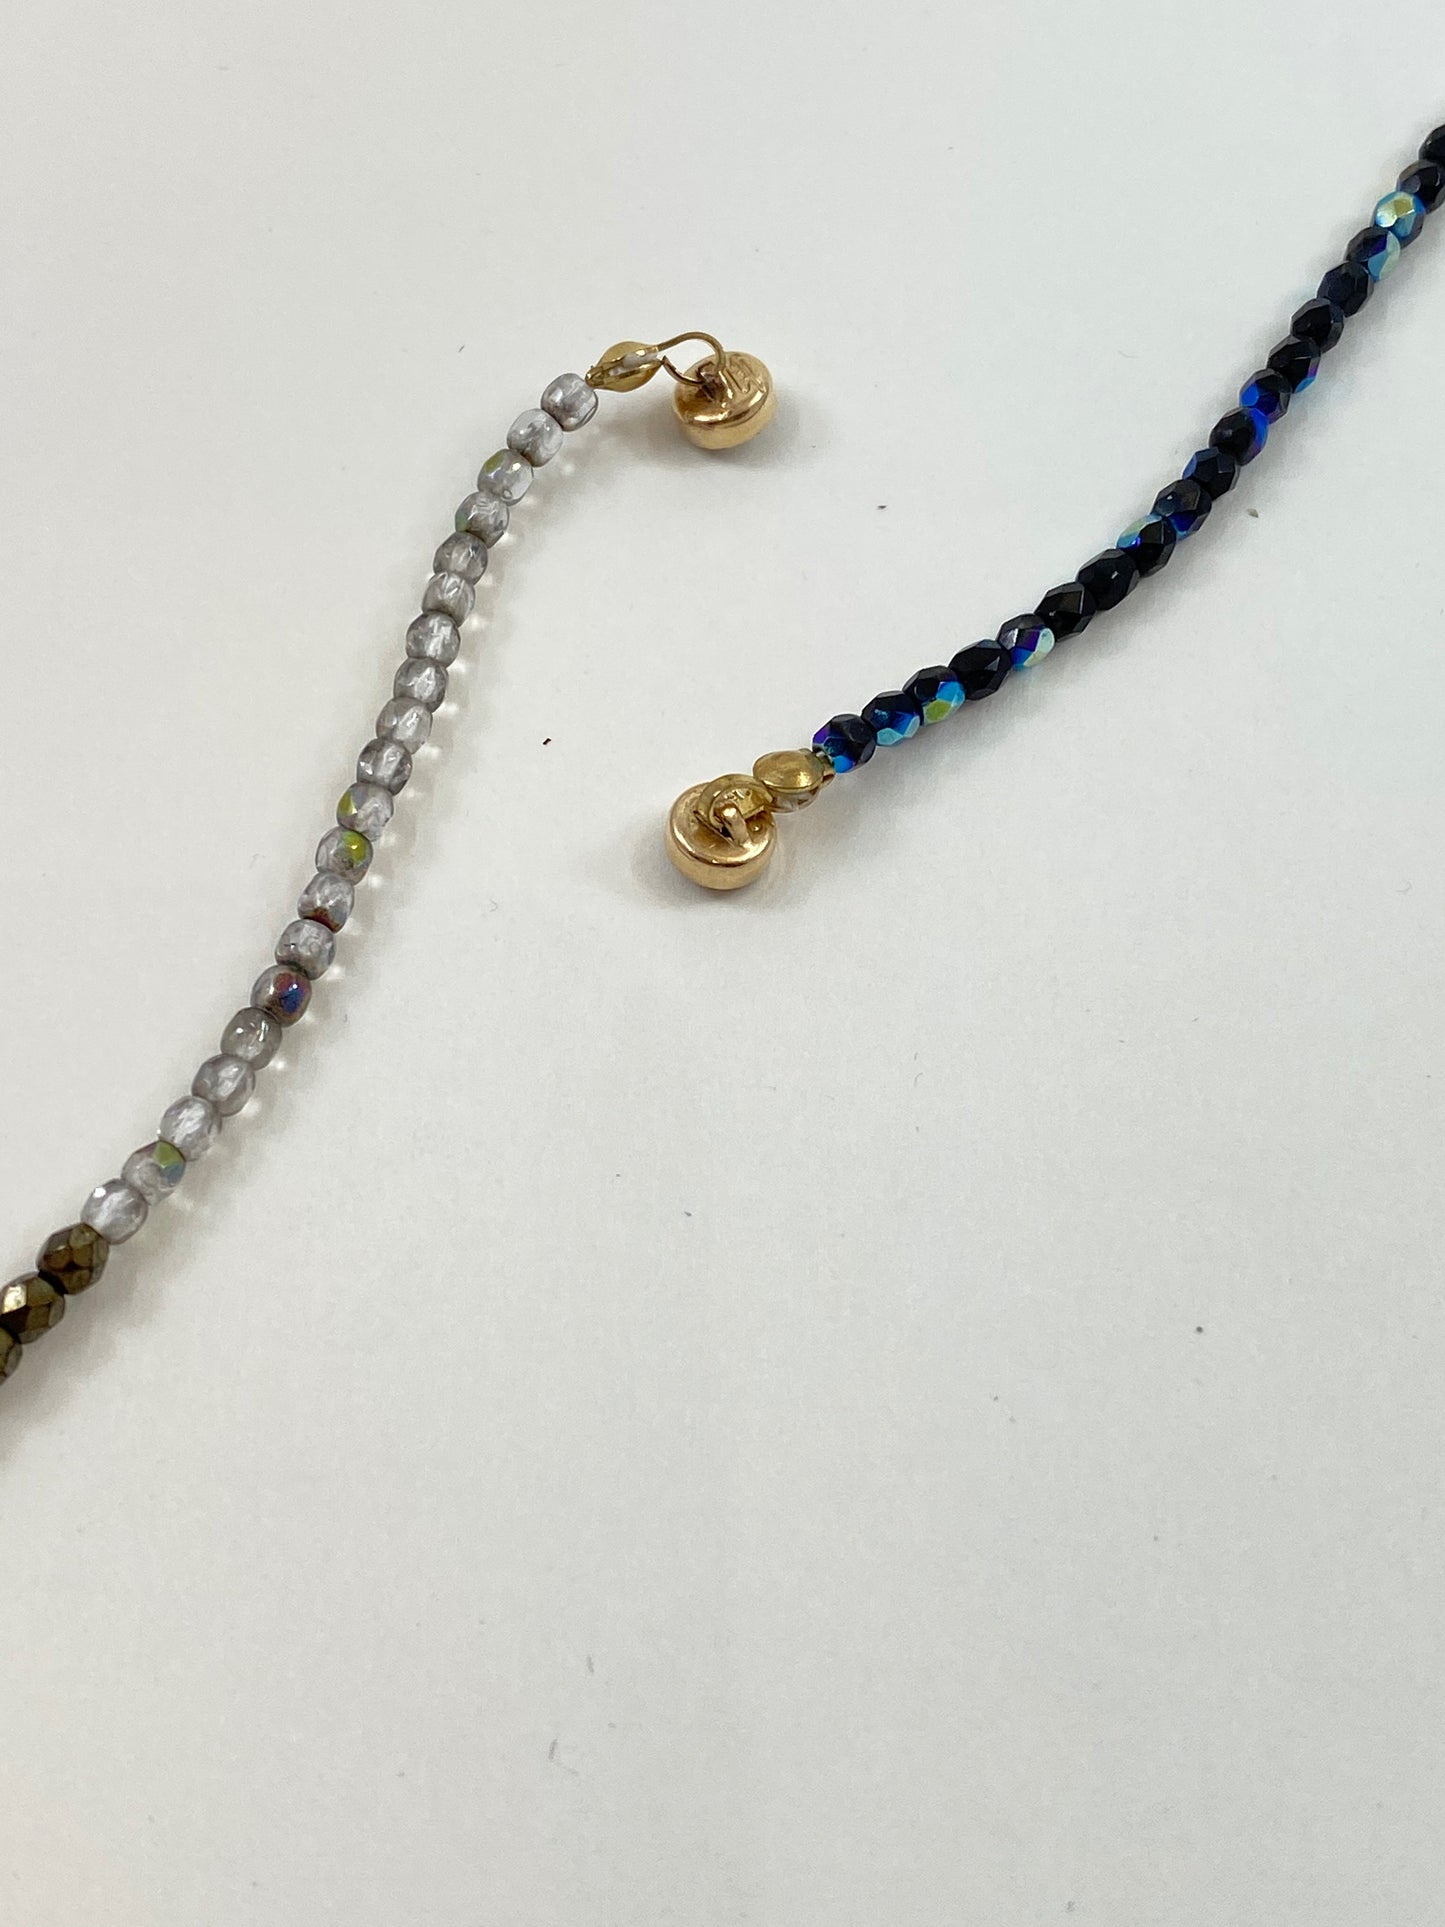 Stunning crystal necklace, with multi colors and designed to wear long or short. Finished with a quality gold filled magnetic clasp.